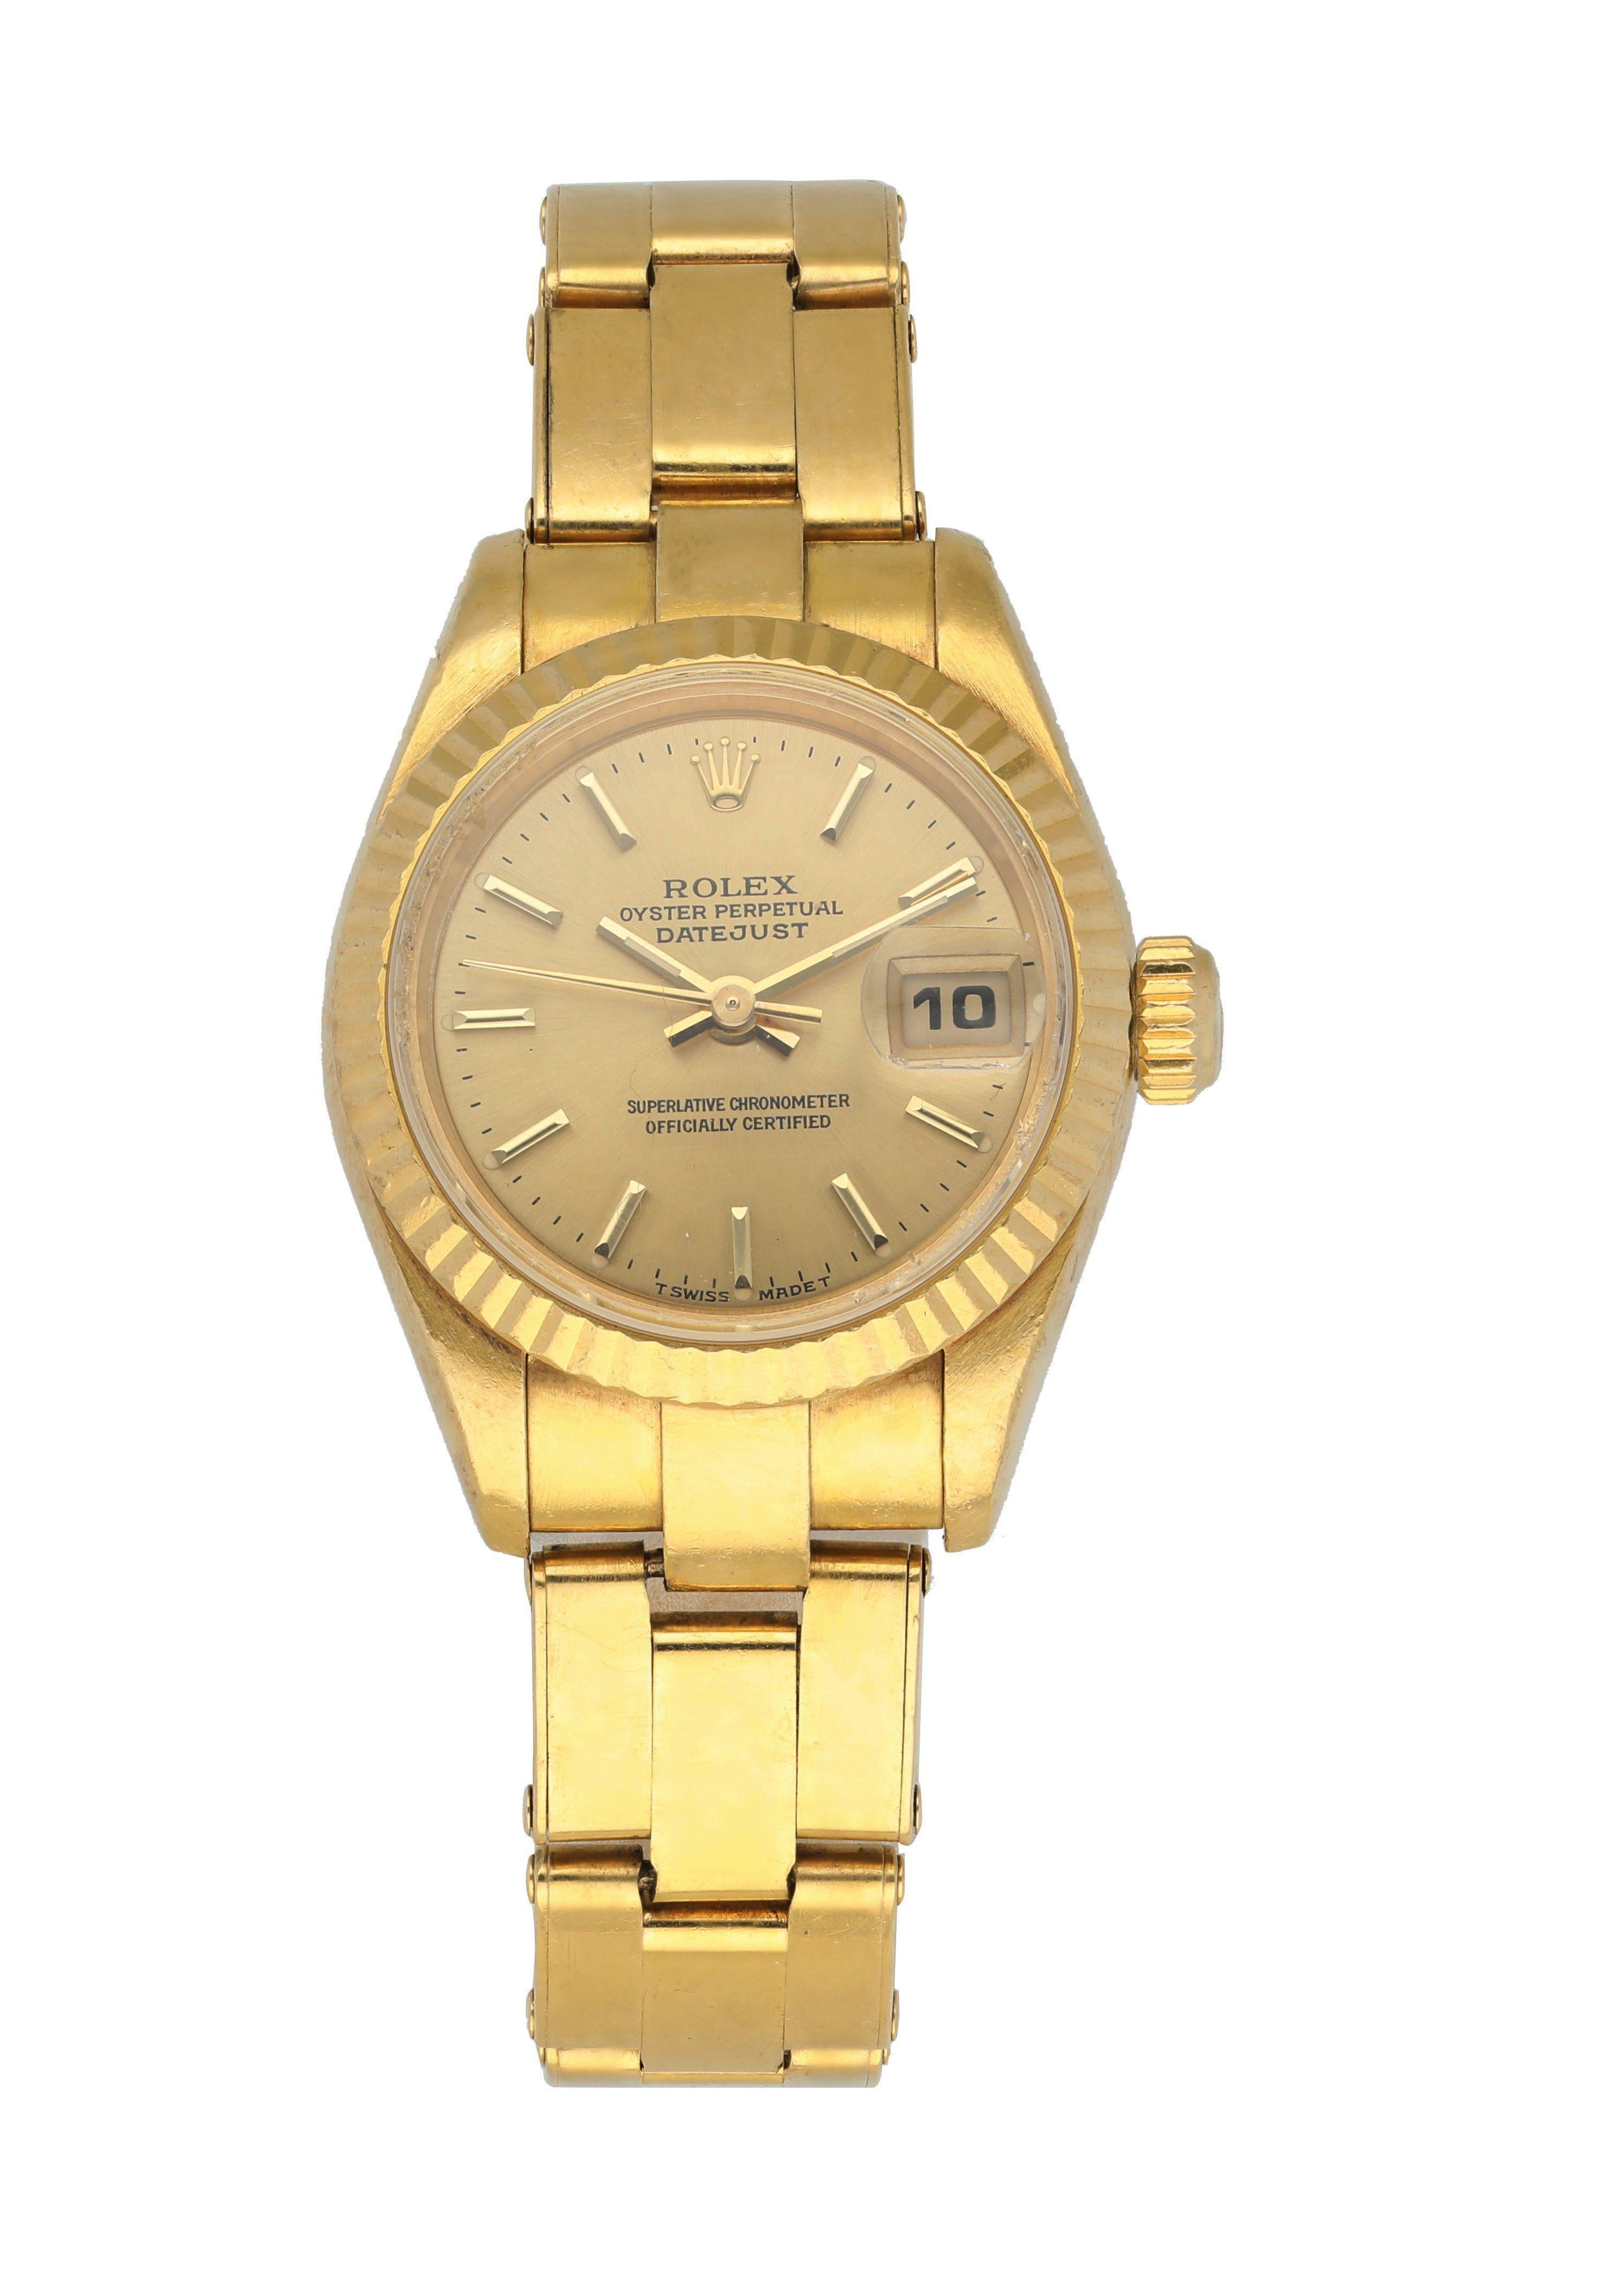 Rolex Datejust President 69178 Ladies Watch. 
26mm 18k Yellow gold case. 
Yellow Gold fluted bezel. 
Champagne dial with gold hands and index hour markers. 
Minute markers on the outer dial. 
Date display at the 3 o'clock position. 
Yellow Gold